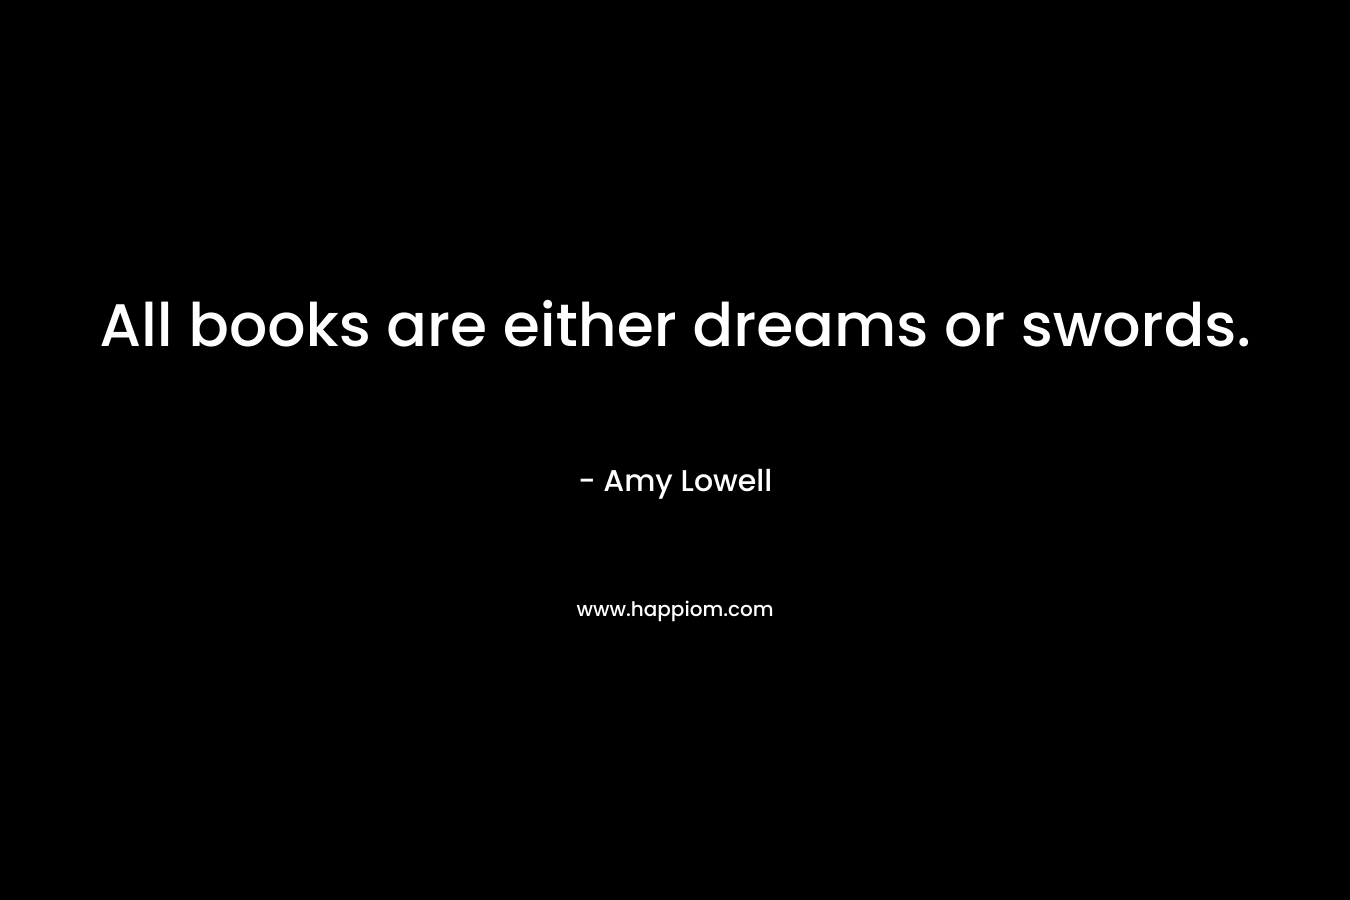 All books are either dreams or swords.